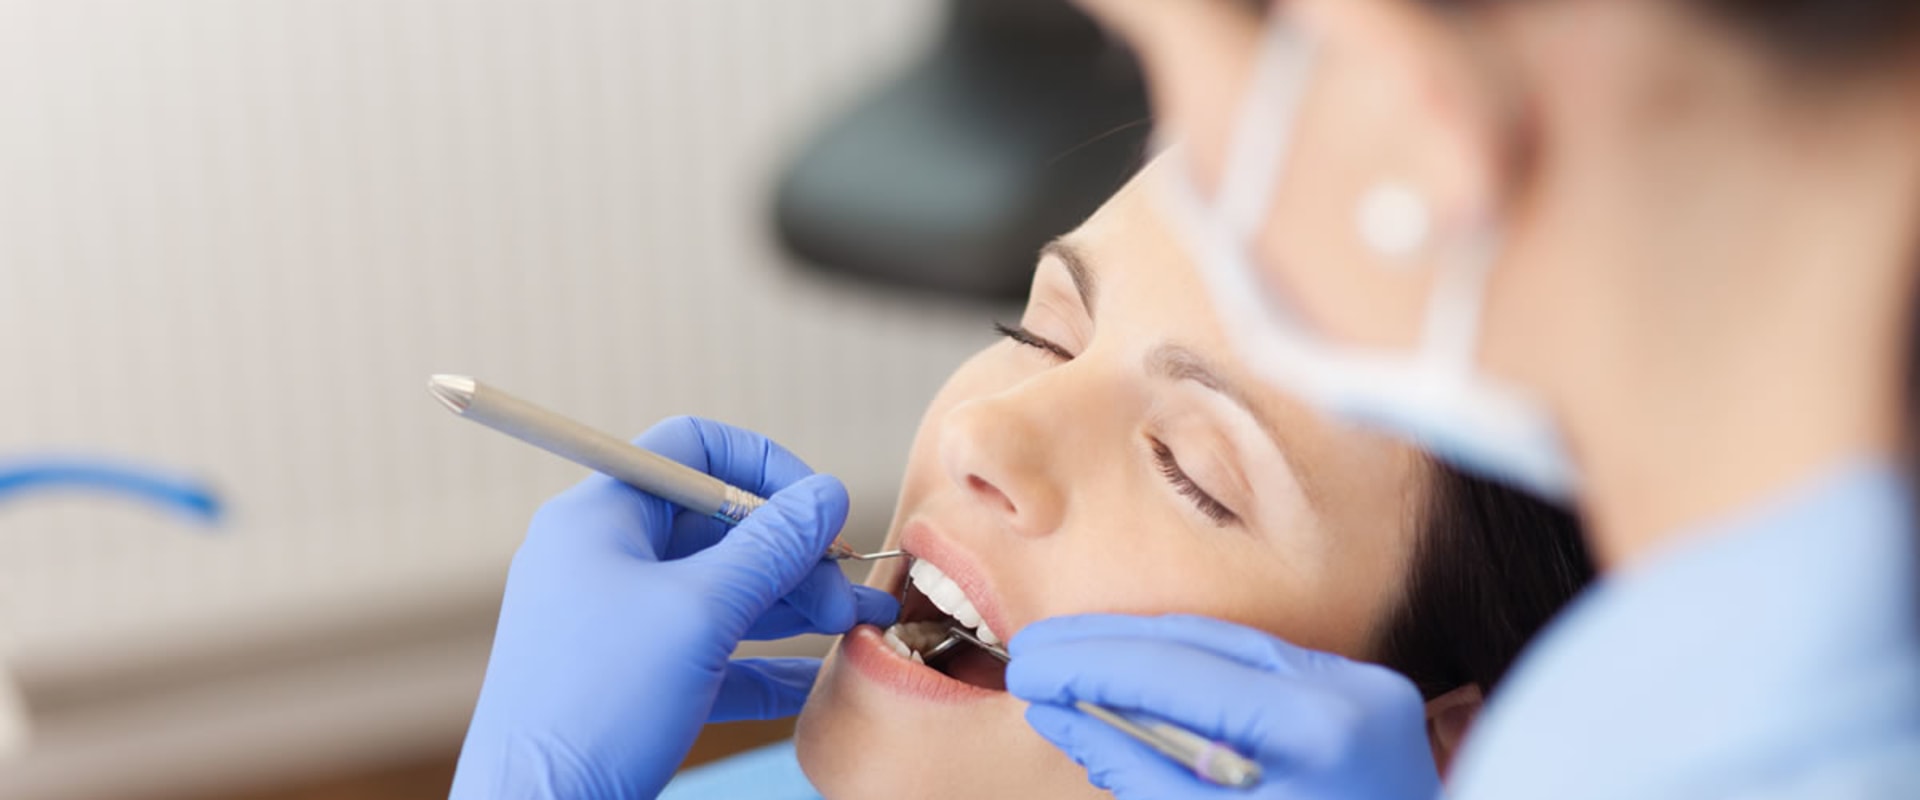 Benefits and Risks of Sedation Dentistry: What You Need to Know